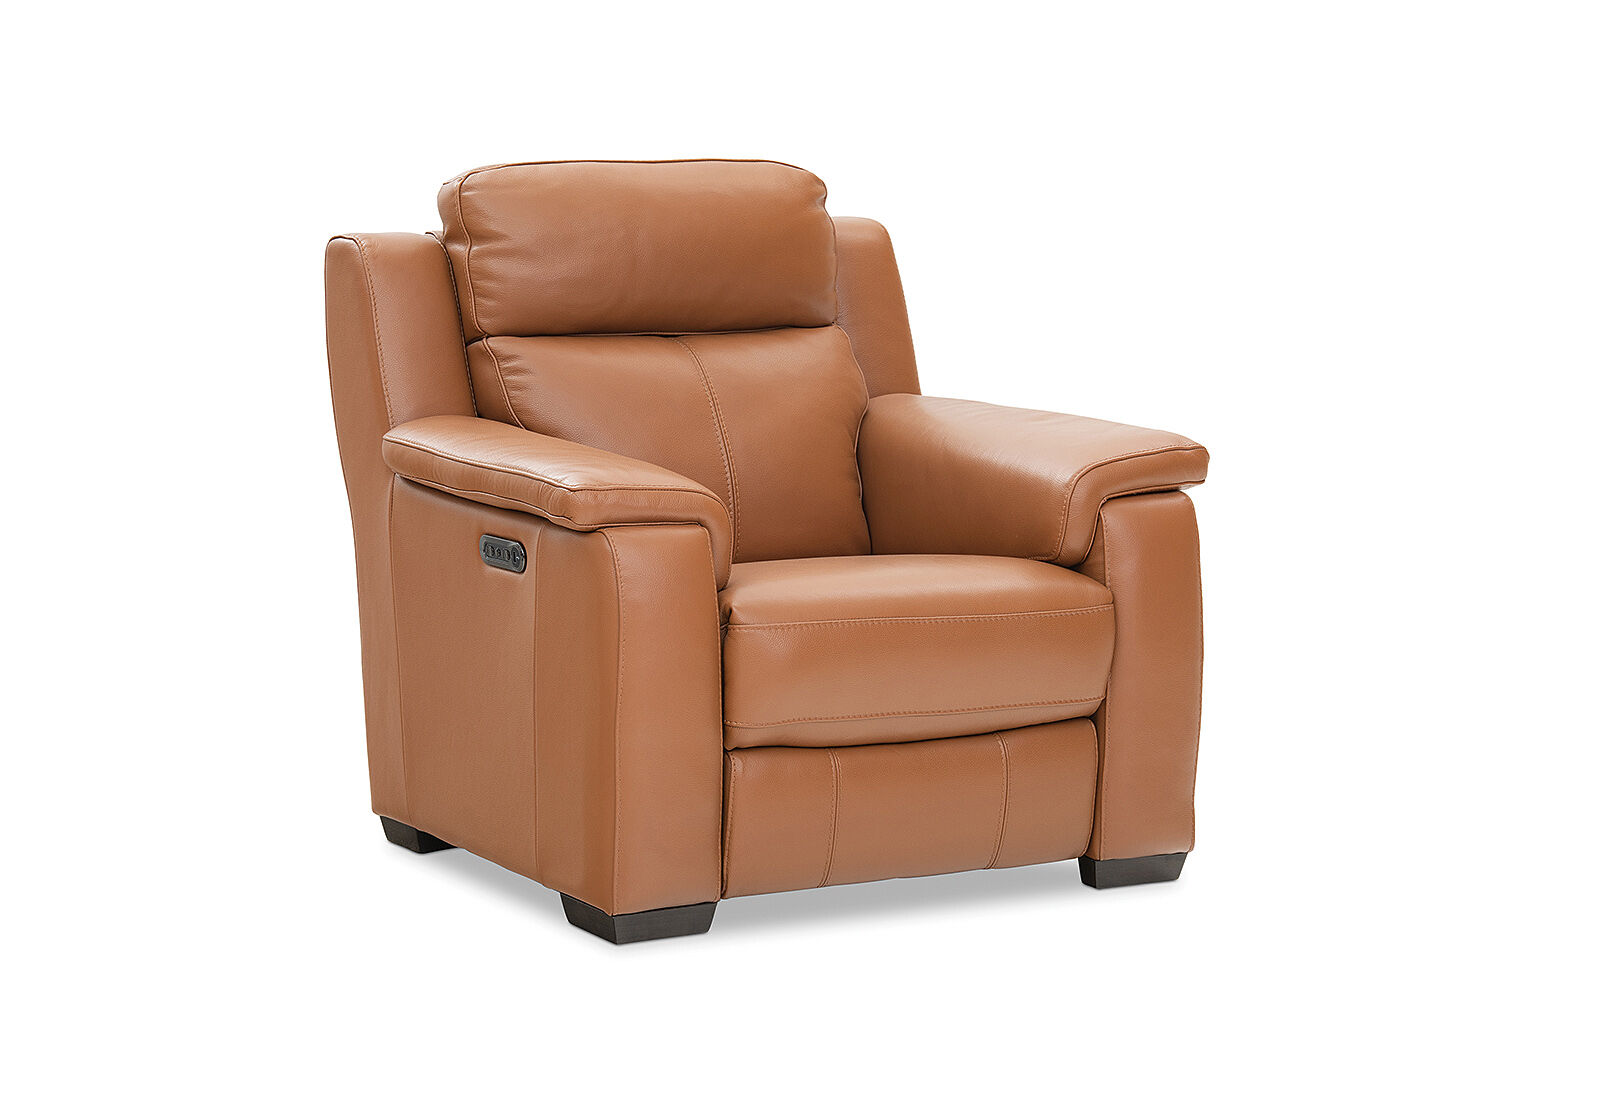 Tan Capello Leather Electric Recliner, Tan Leather Recliner Chair